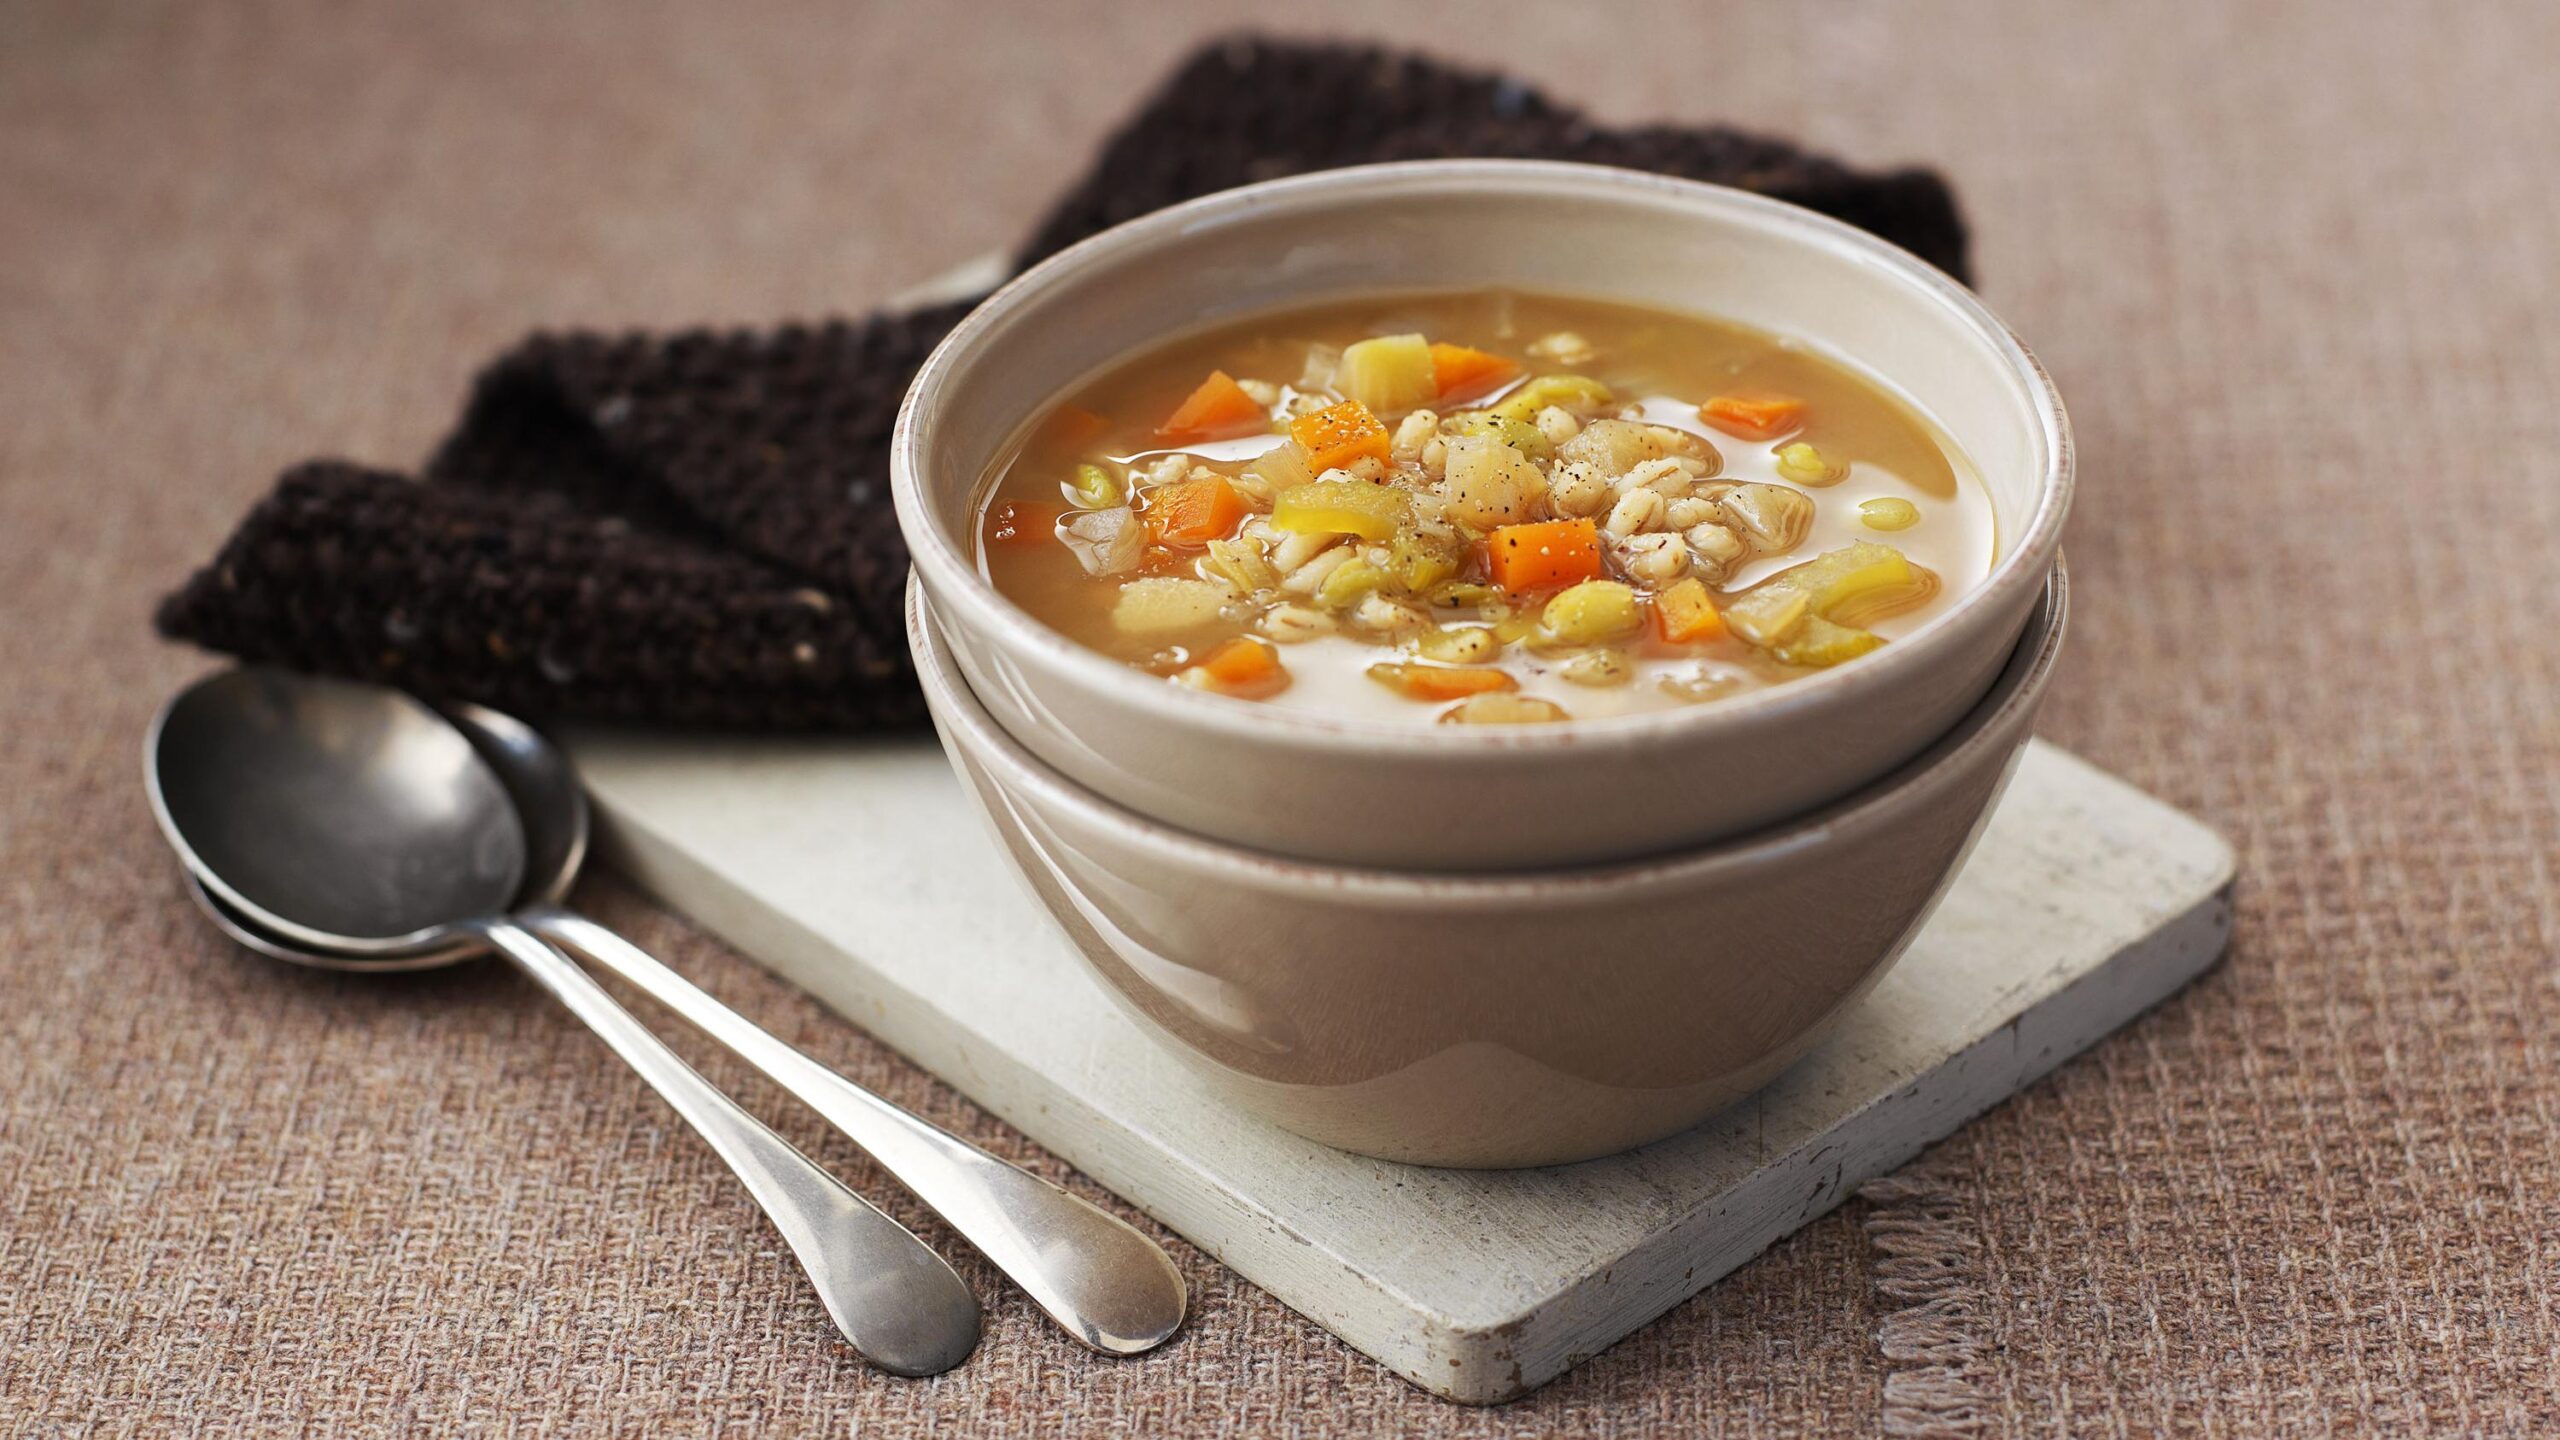 Hearty Scottish Broth Recipe: A Delicious Comfort Food